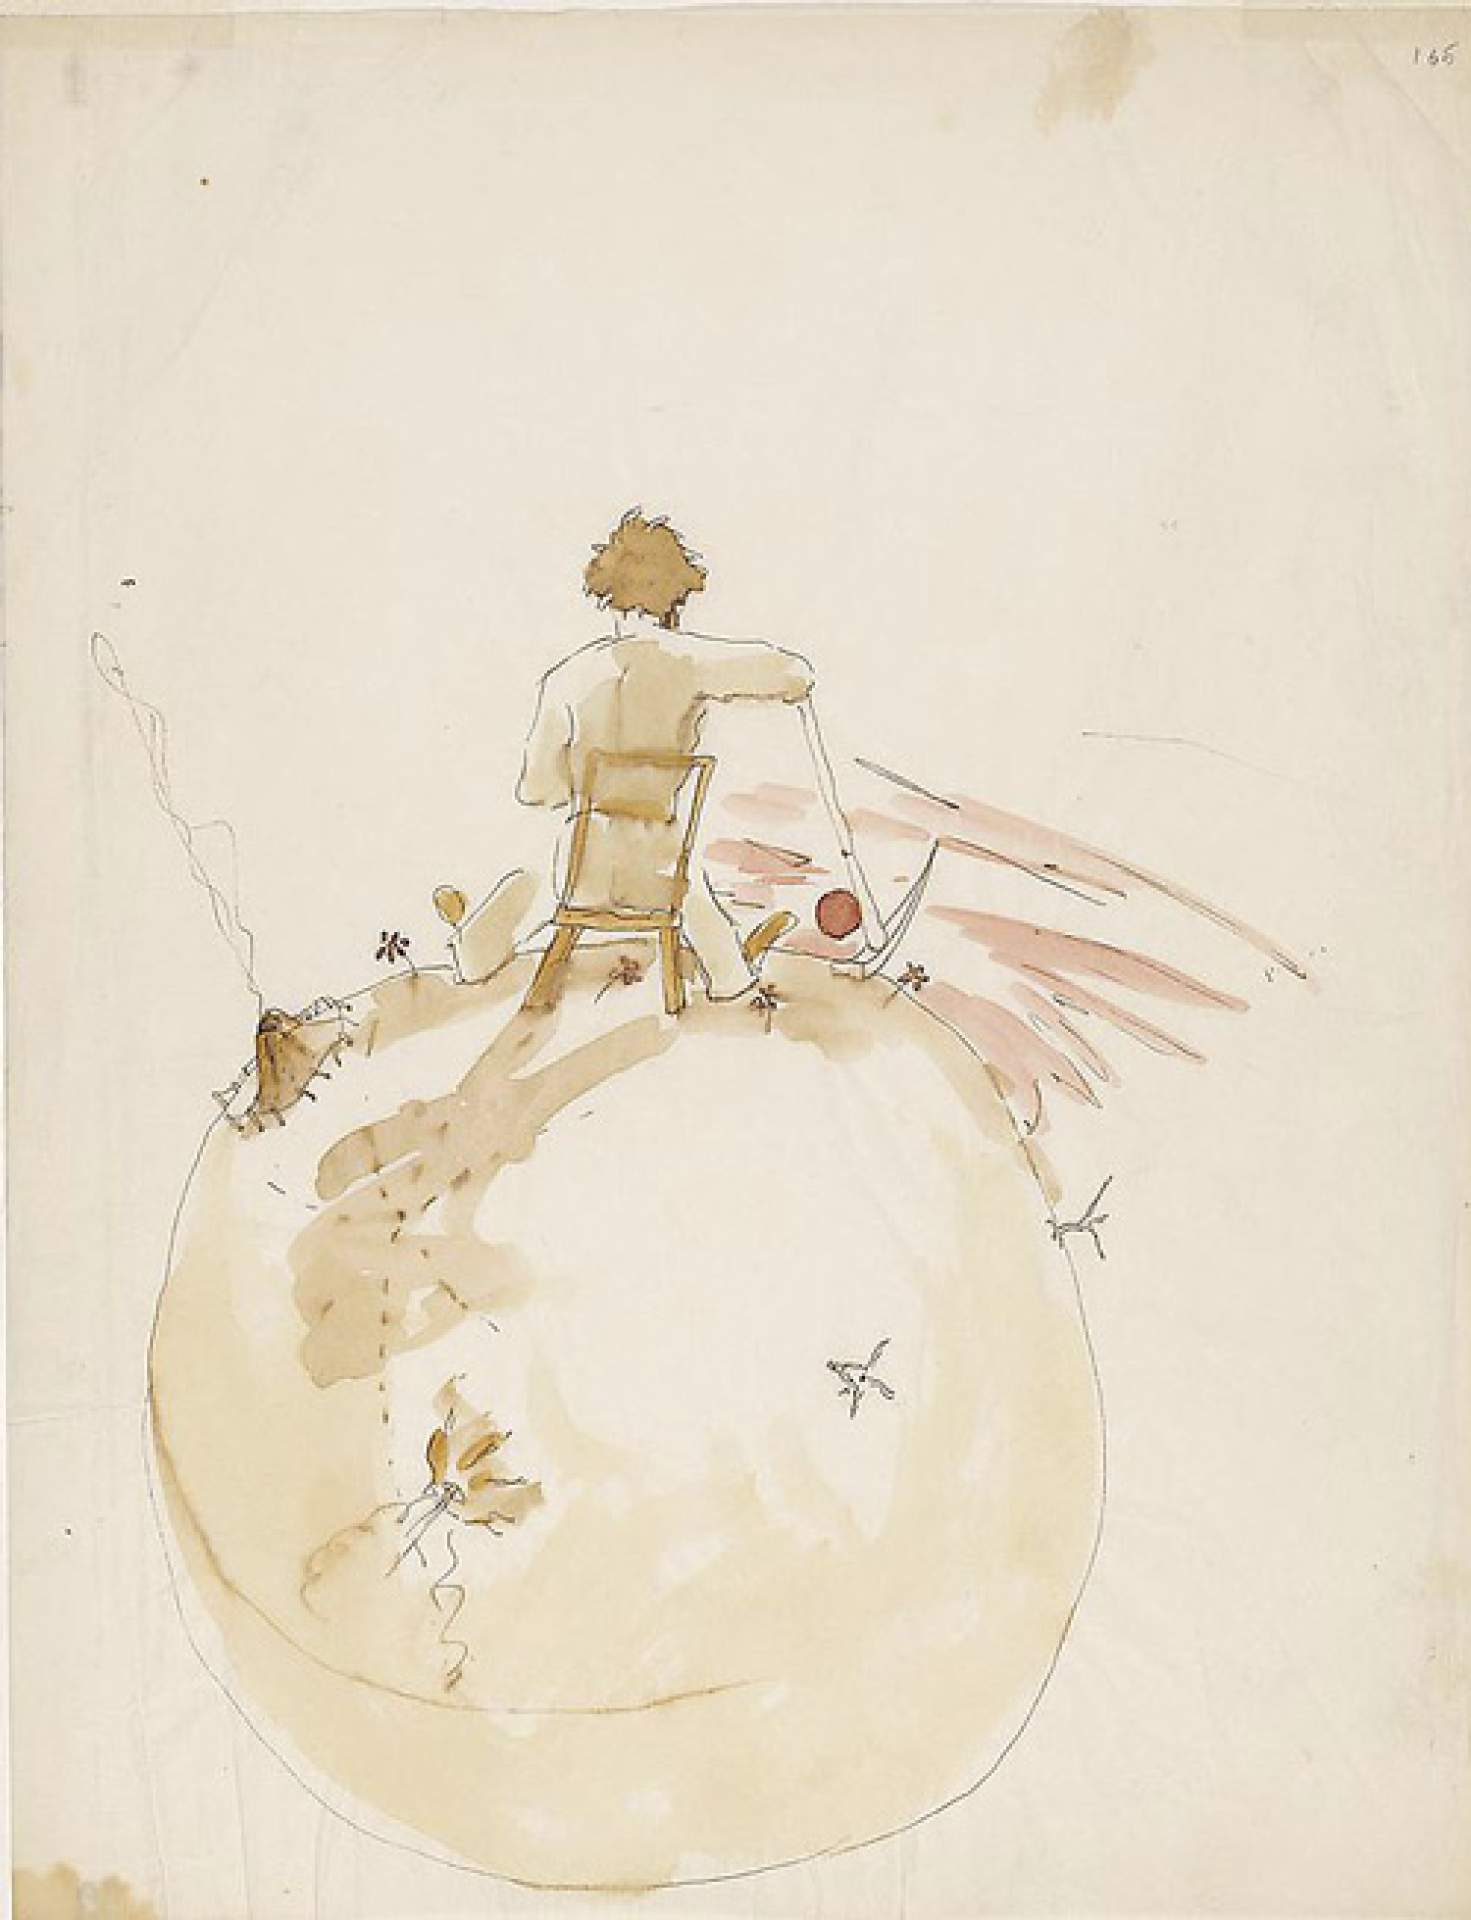 Illustration from the book: Little Prince